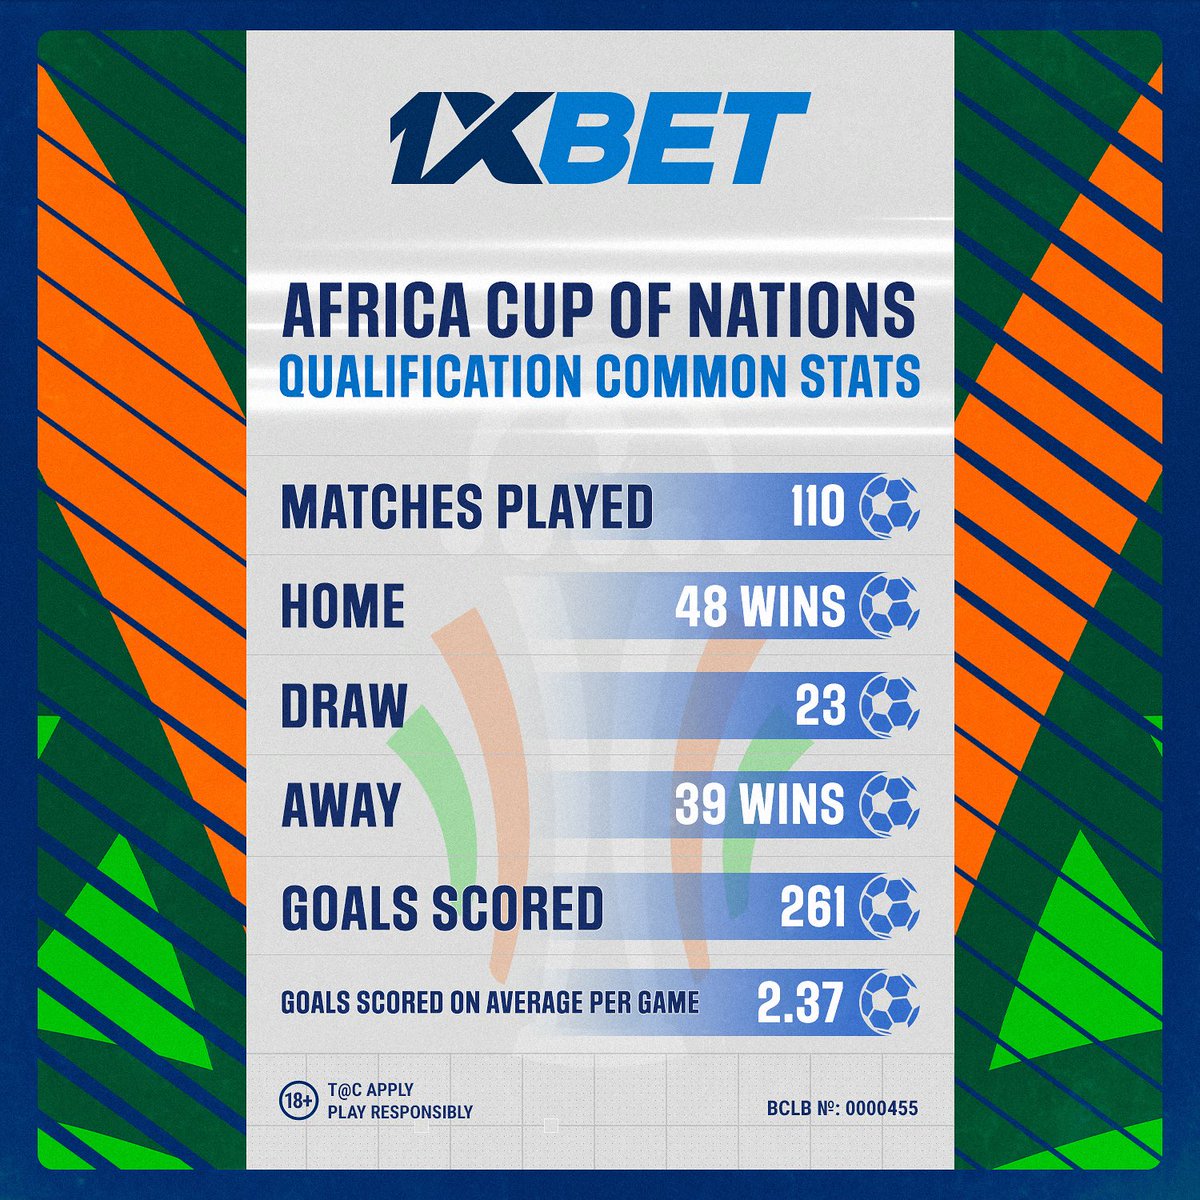 Africa Cup of Nations Qualifiers coming to the end🔥

We saw a lot of interesting matches - and before the last round we prepared the statistics of this tournament for you!

Learn it, make your prediction and support your favourites💪🏿

#AfricaCupOfNations #CAN2024 #ProudlyAfrican